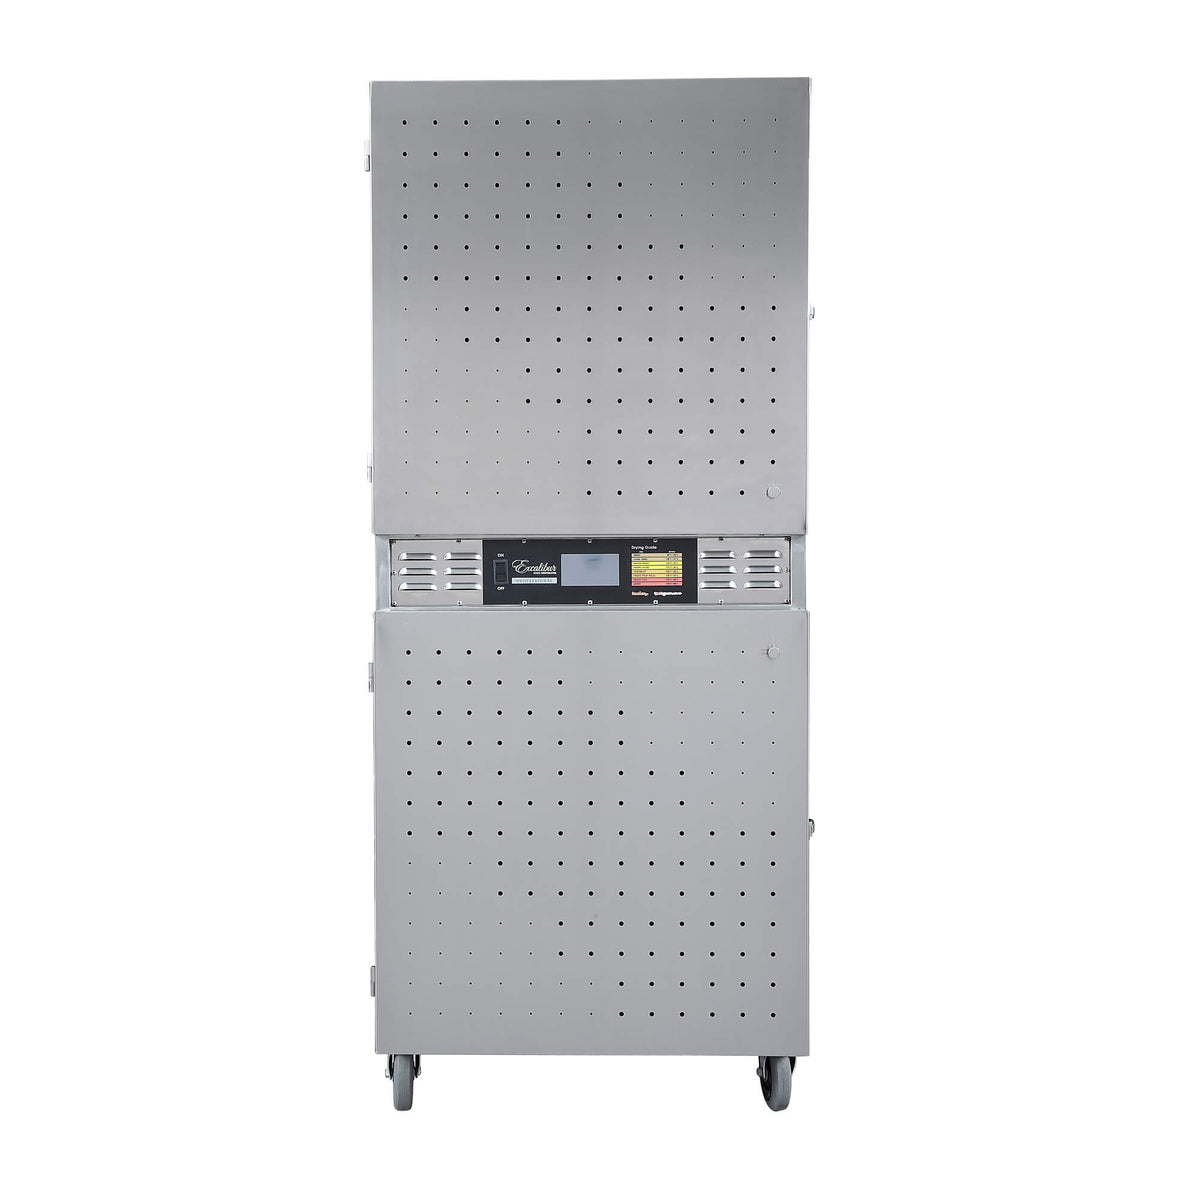 Excalibur COMM2 42 tray stainless steel commercial digital dehydrator front view with doors closed.